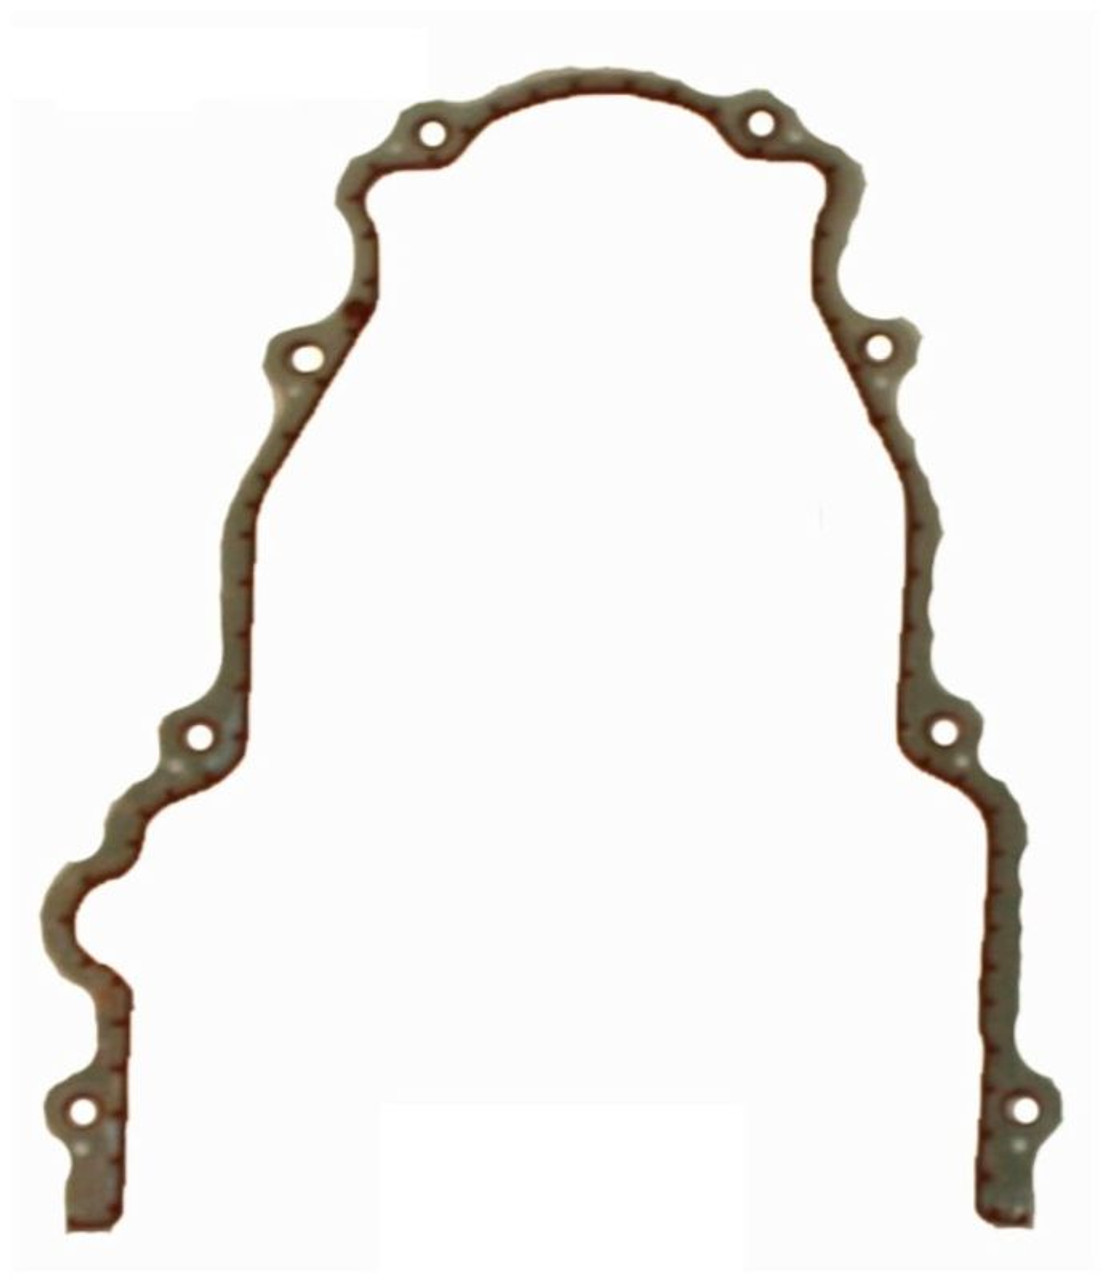 2003 Chevrolet Express 2500 5.3L Engine Timing Cover Gasket TCG293-A -117